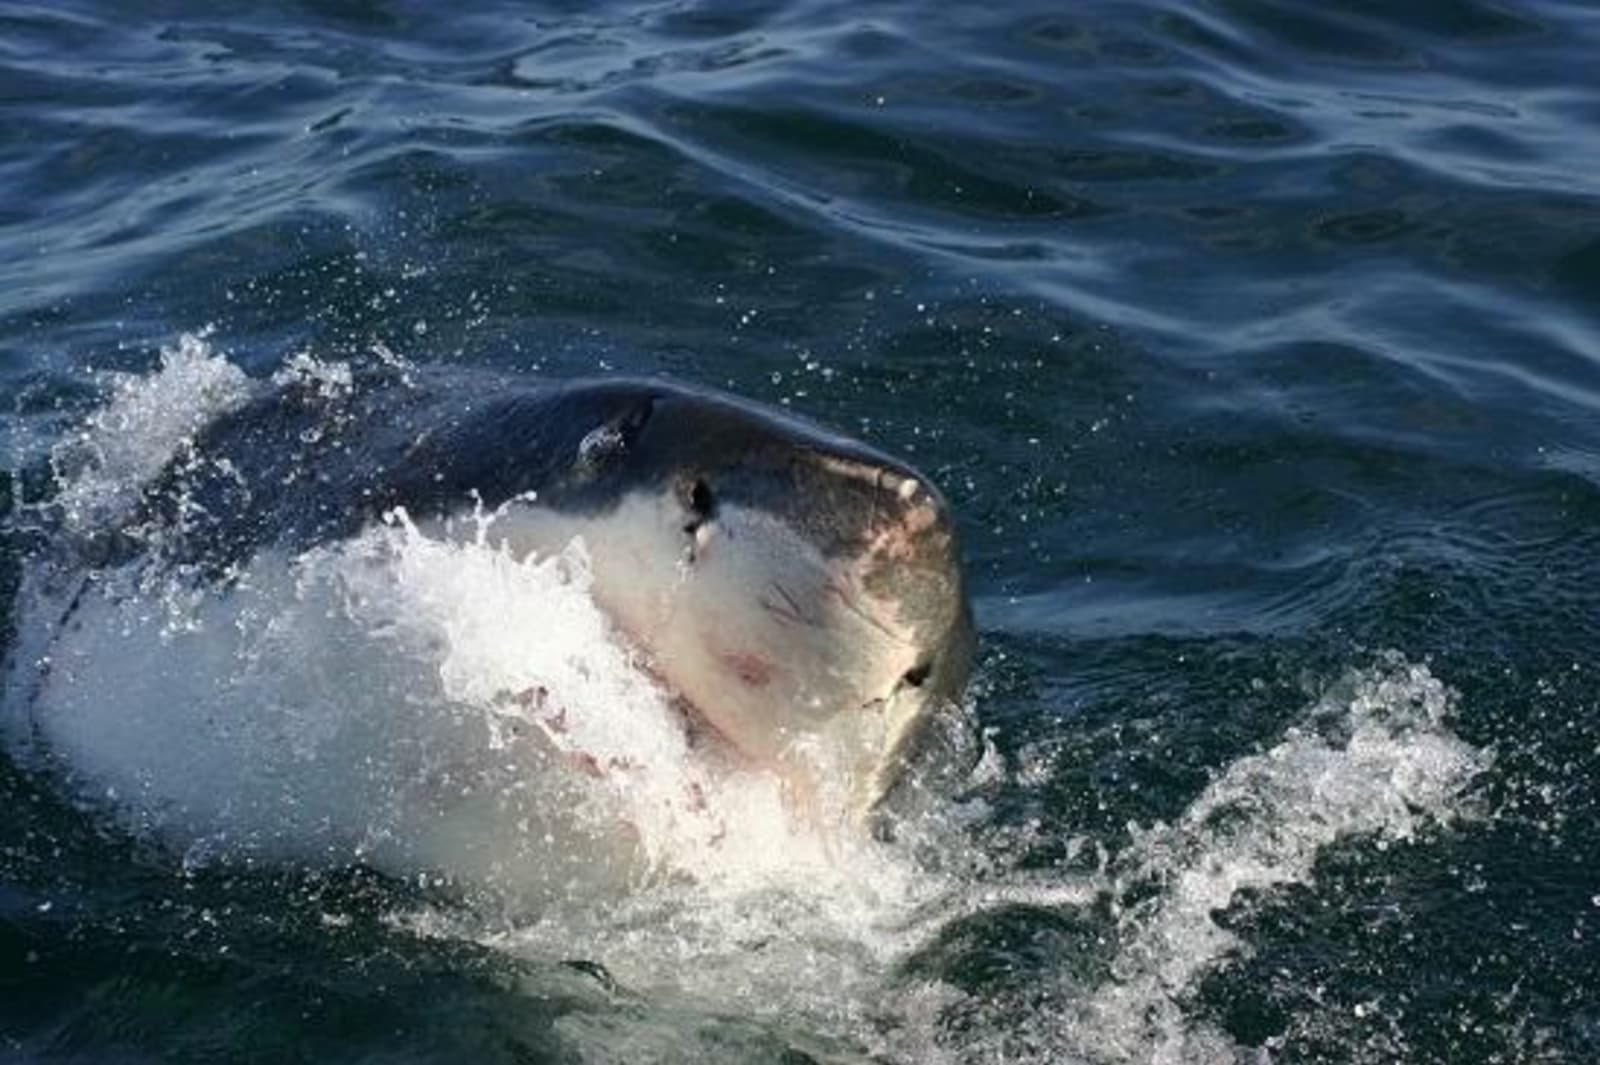 Great-White-shark-taken-off-the-coast-of-South-Africa.jpg